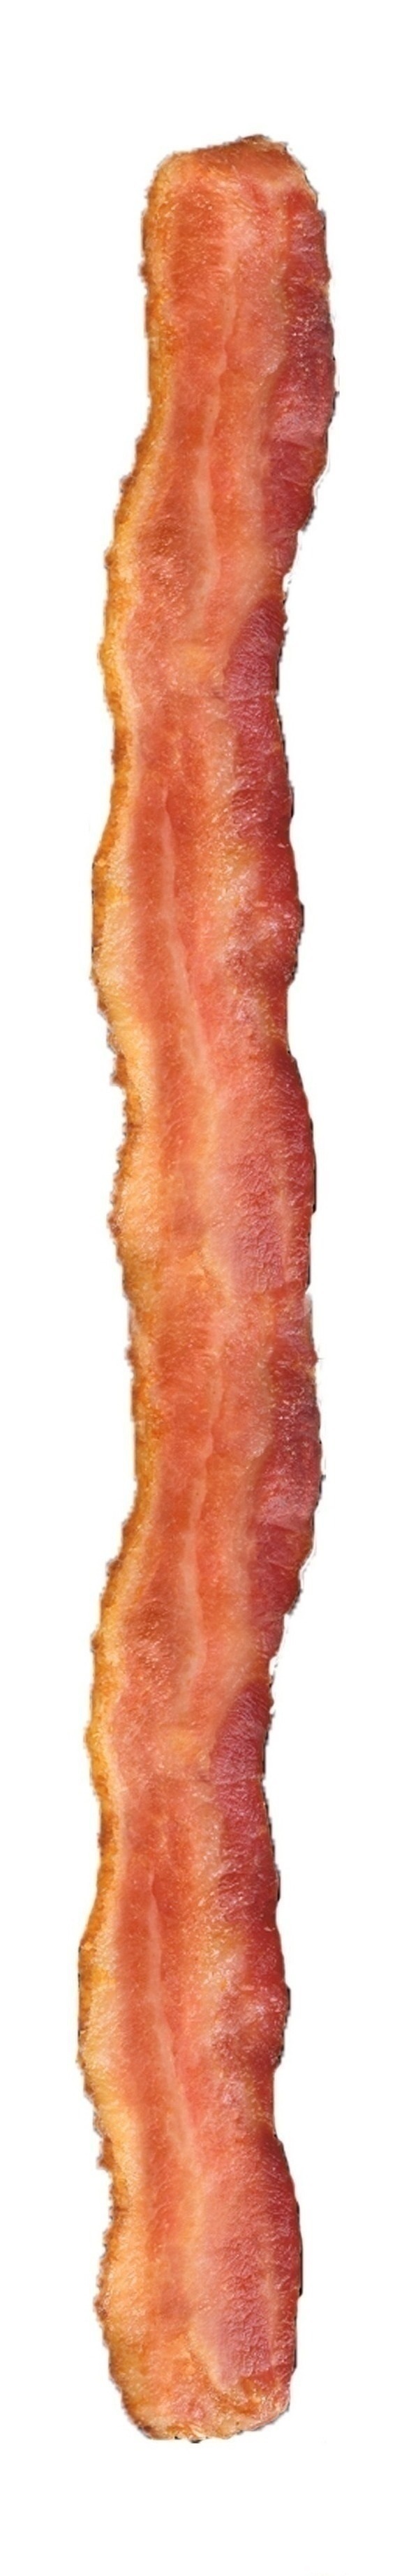 Bacon-strips.png